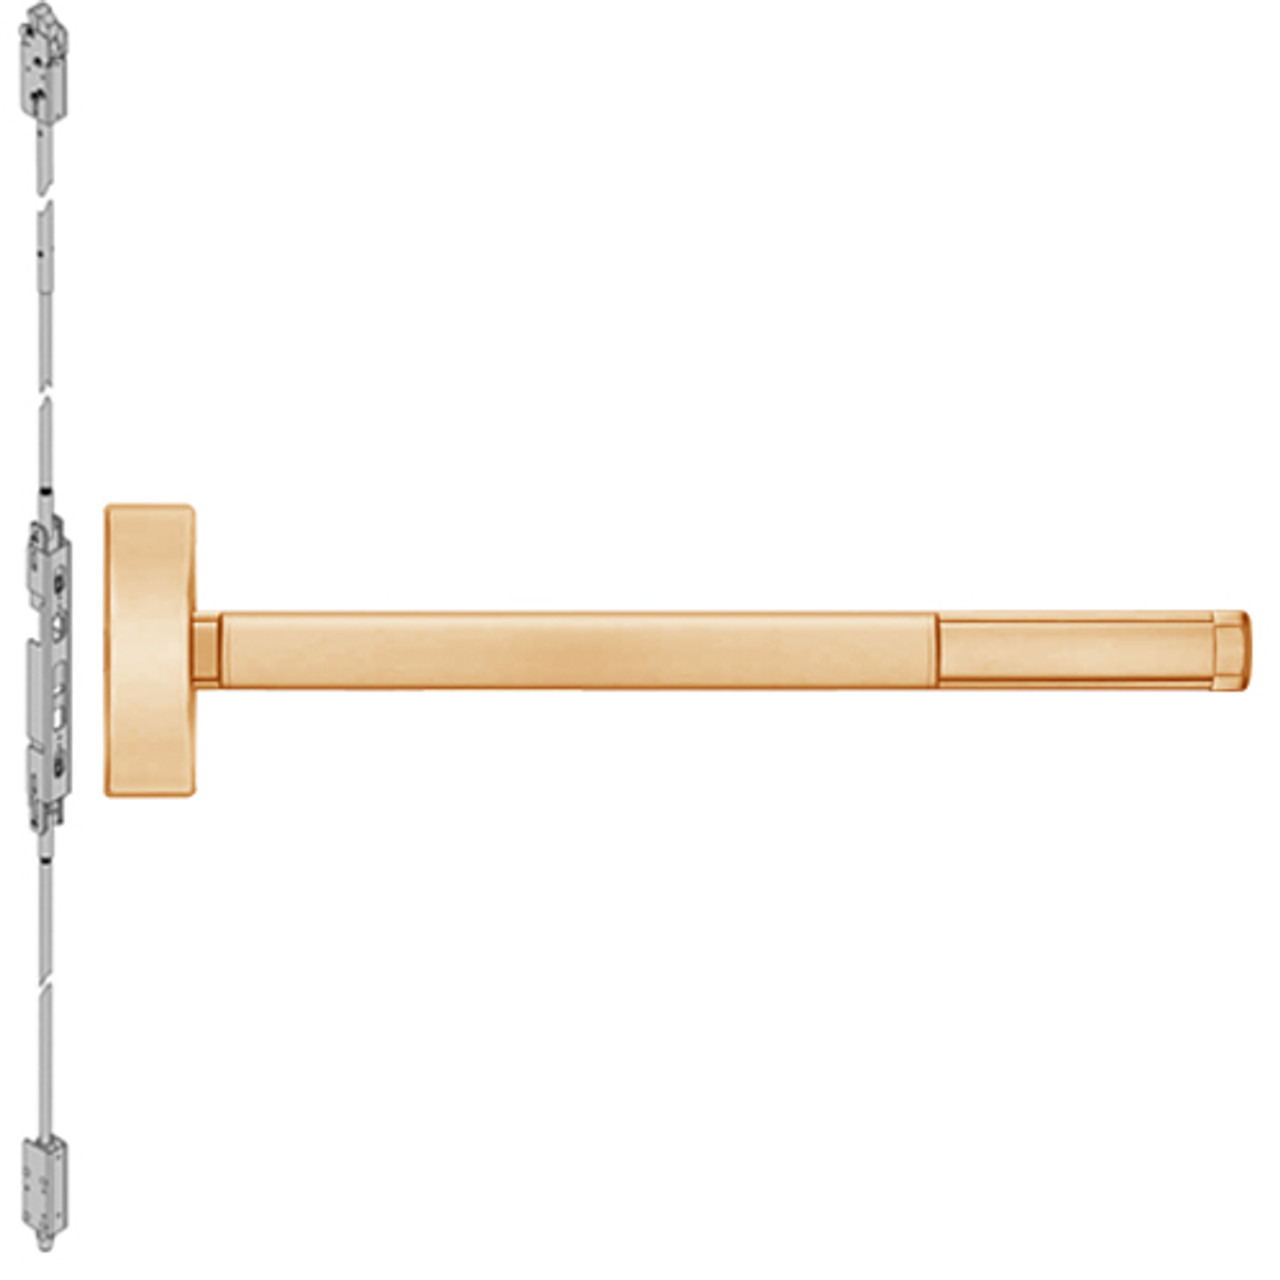 MLR2815-612-48 PHI 2800 Series Concealed Vertical Rod Exit Device with Motorized Latch Retraction Prepped for Thumbpiece Always Active in Satin Bronze Finish